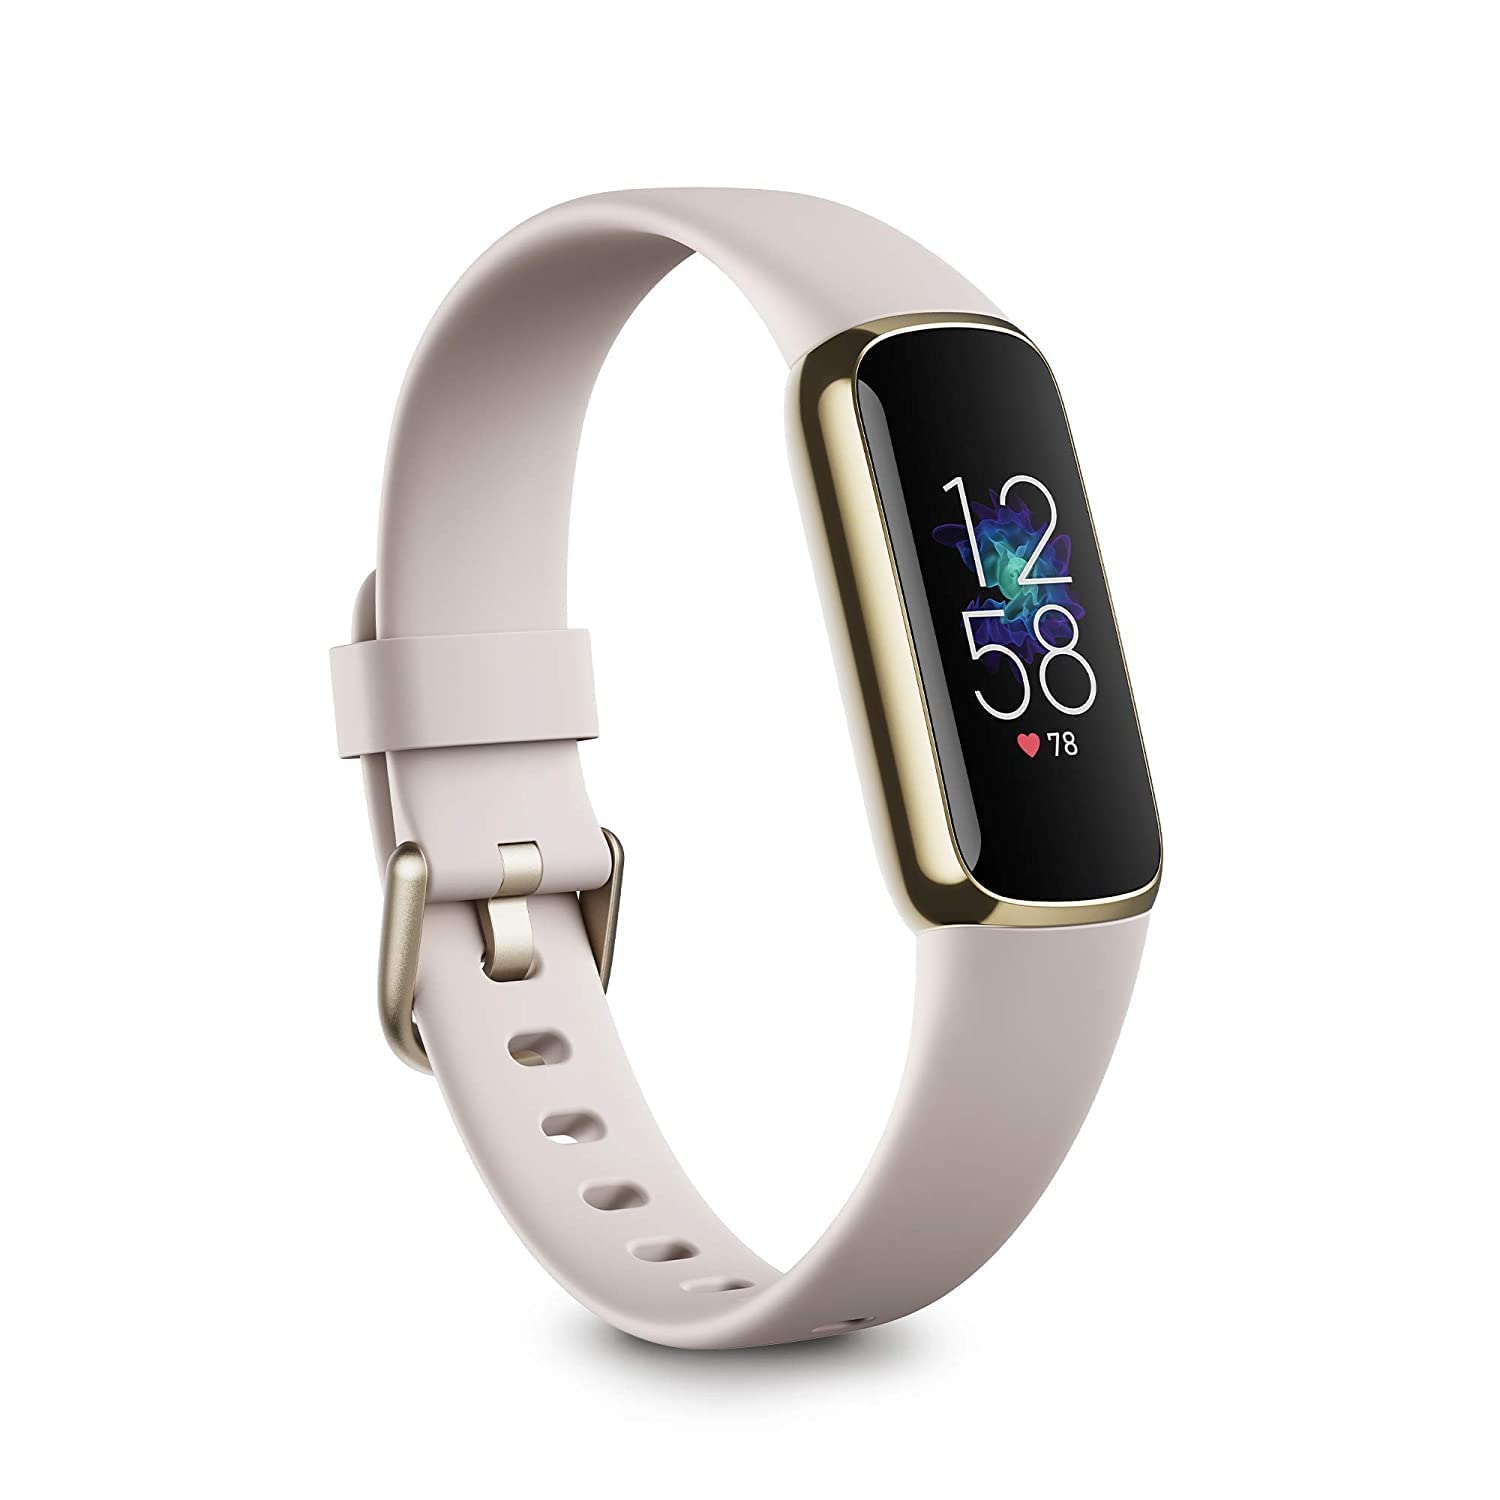 Fitbit Luxe Fitness and Wellness Tracker with Stress Management, Sleep  Tracking and 24/7 Heart Rate, One Size S L Bands Included, Lunar White/Soft  Gold Stainless Steel, 1 Count (Renewed) : Sports & Outdoors 